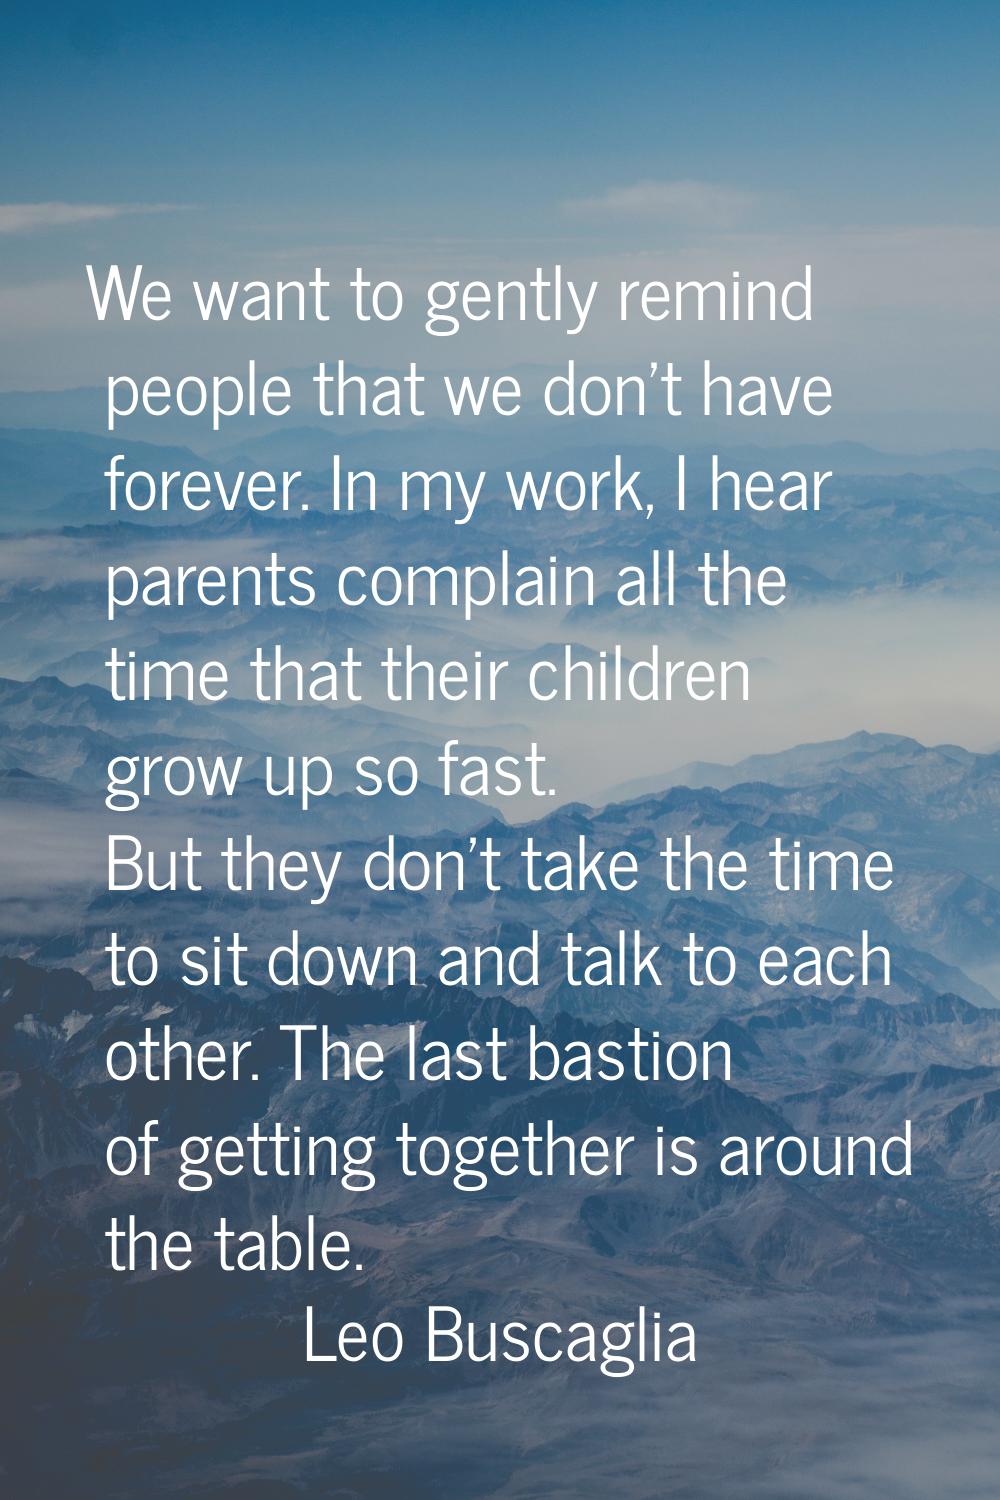 We want to gently remind people that we don't have forever. In my work, I hear parents complain all